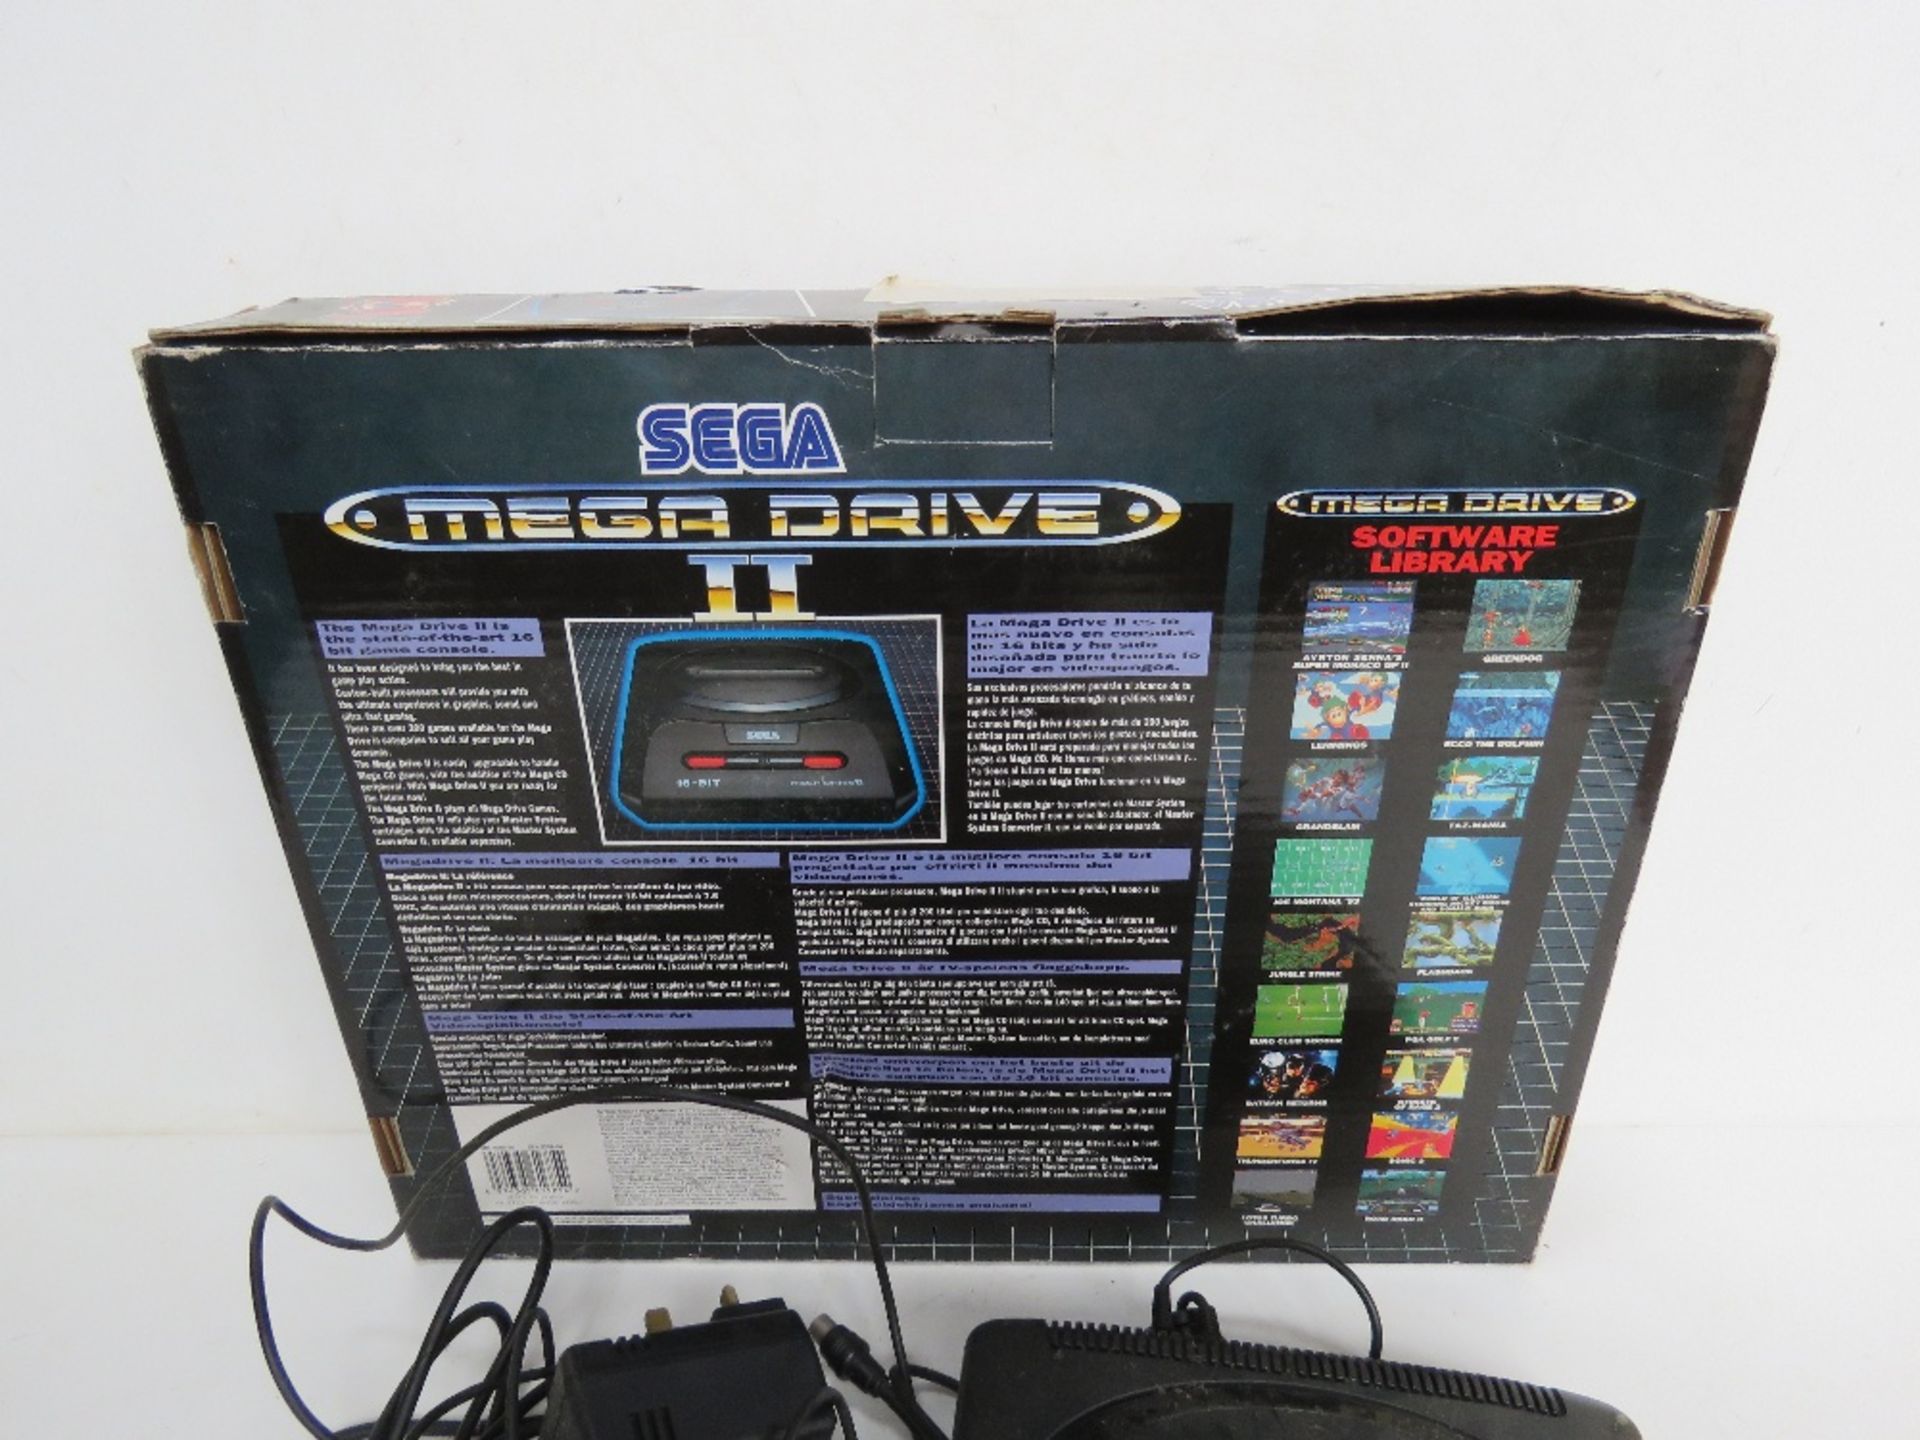 A Sega Mega Drive II console with controllers and cable in original box. - Image 4 of 4